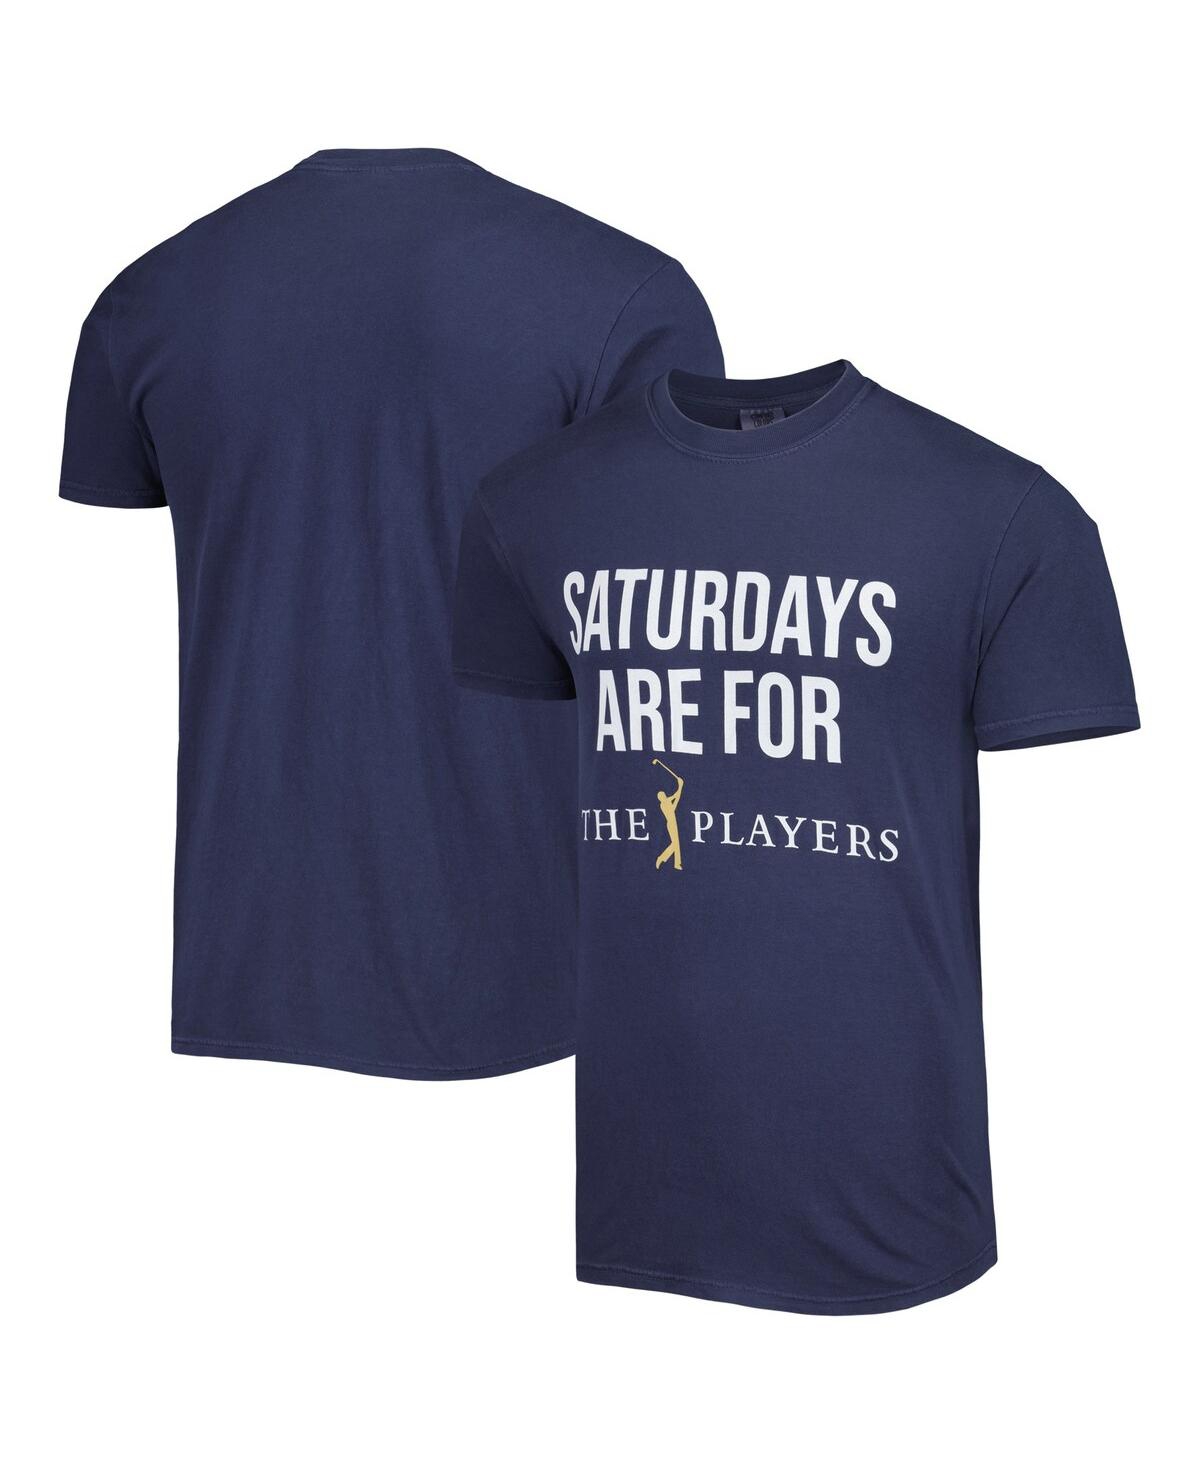 BARSTOOL GOLF MEN'S BARSTOOL GOLF NAVY THE PLAYERS SATURDAYS ARE FOR THE PLAYERS T-SHIRT